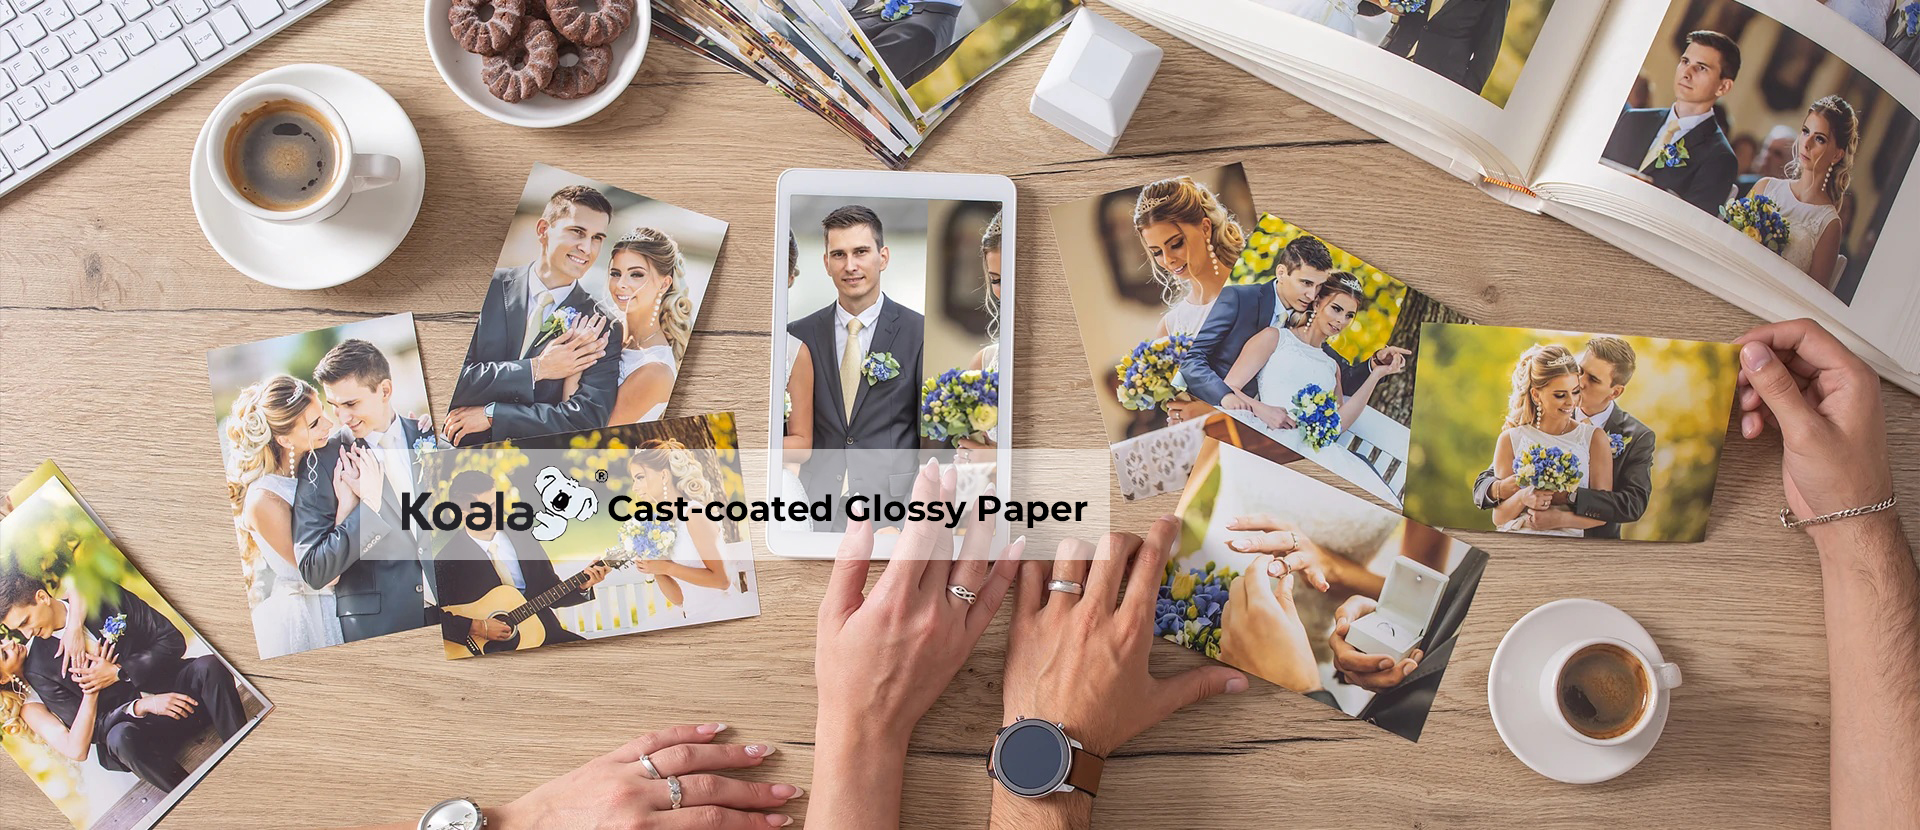 Global Brands' Choice for Quality Photo Paper. Trusted Manufacturing Partner. Koala® Sales Network.